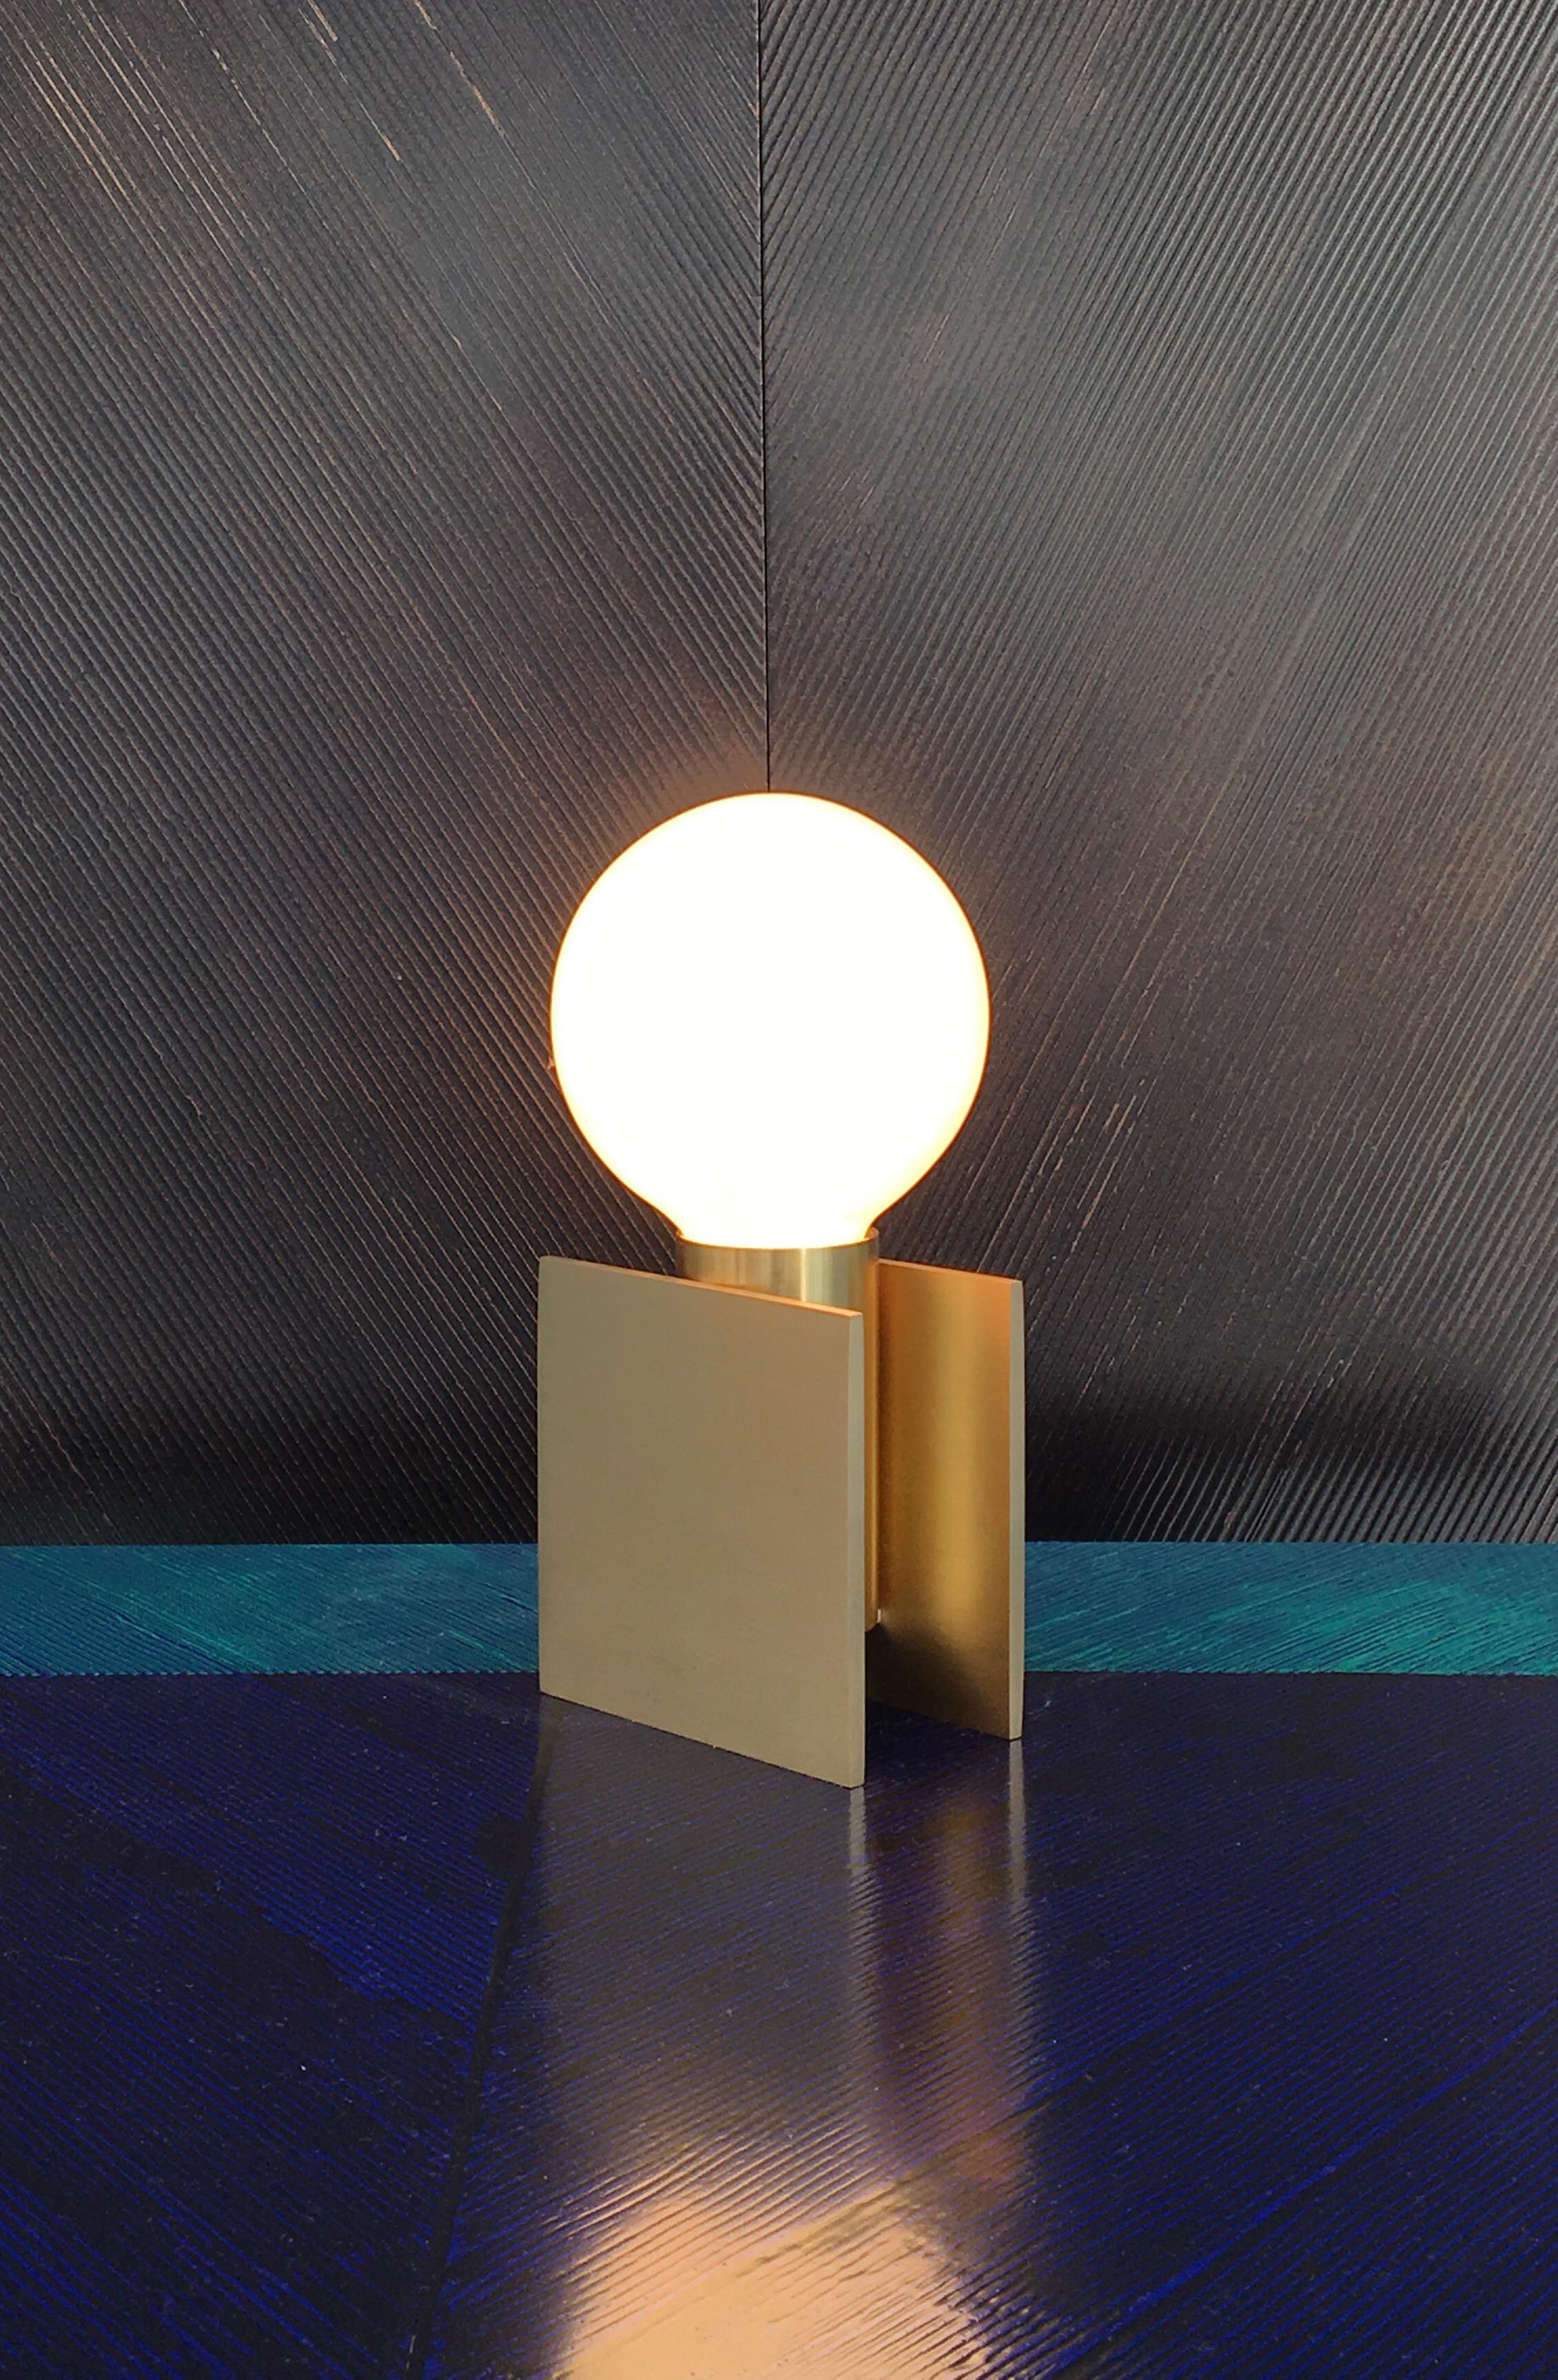 IOI lamp by SB26
Dimensions: W 9.7 x D 9.1 x H 19.2 cm
Materials: Brushed brass structure, varnished finish
 Possibility of patinated brass

IOI is a small table lamp composed from a graphic game of simple shapes. An iconic silhouette with its